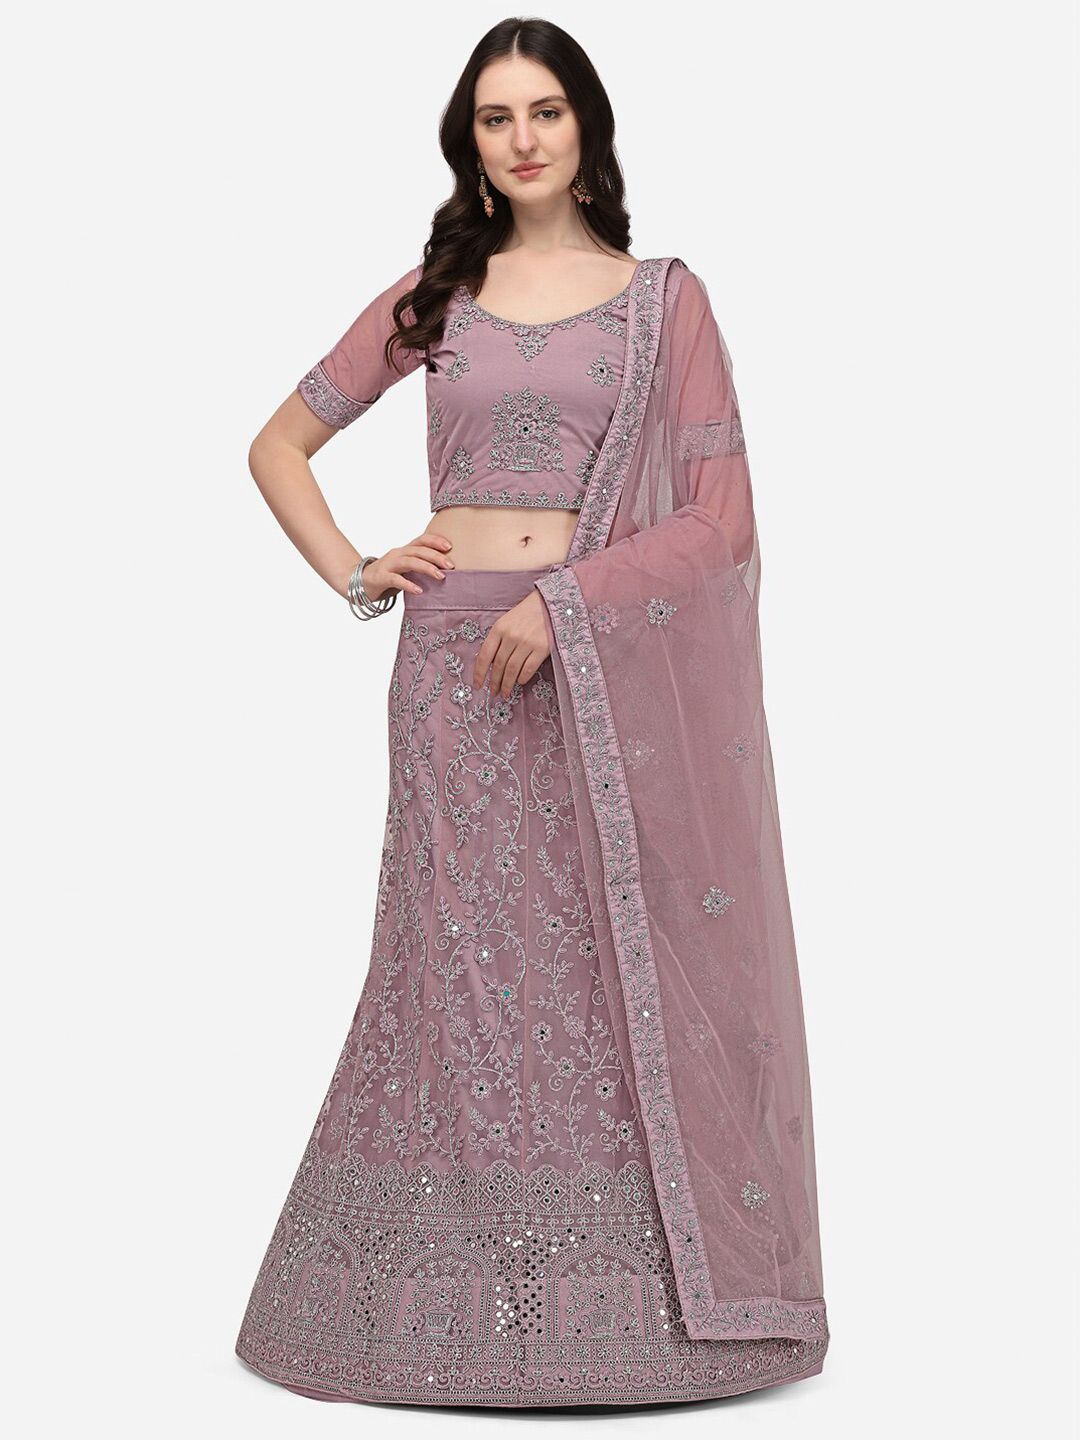 VRSALES Lavender Embroidered Mirror Work Semi-Stitched Lehenga & Unstitched Blouse With Dupatta Price in India